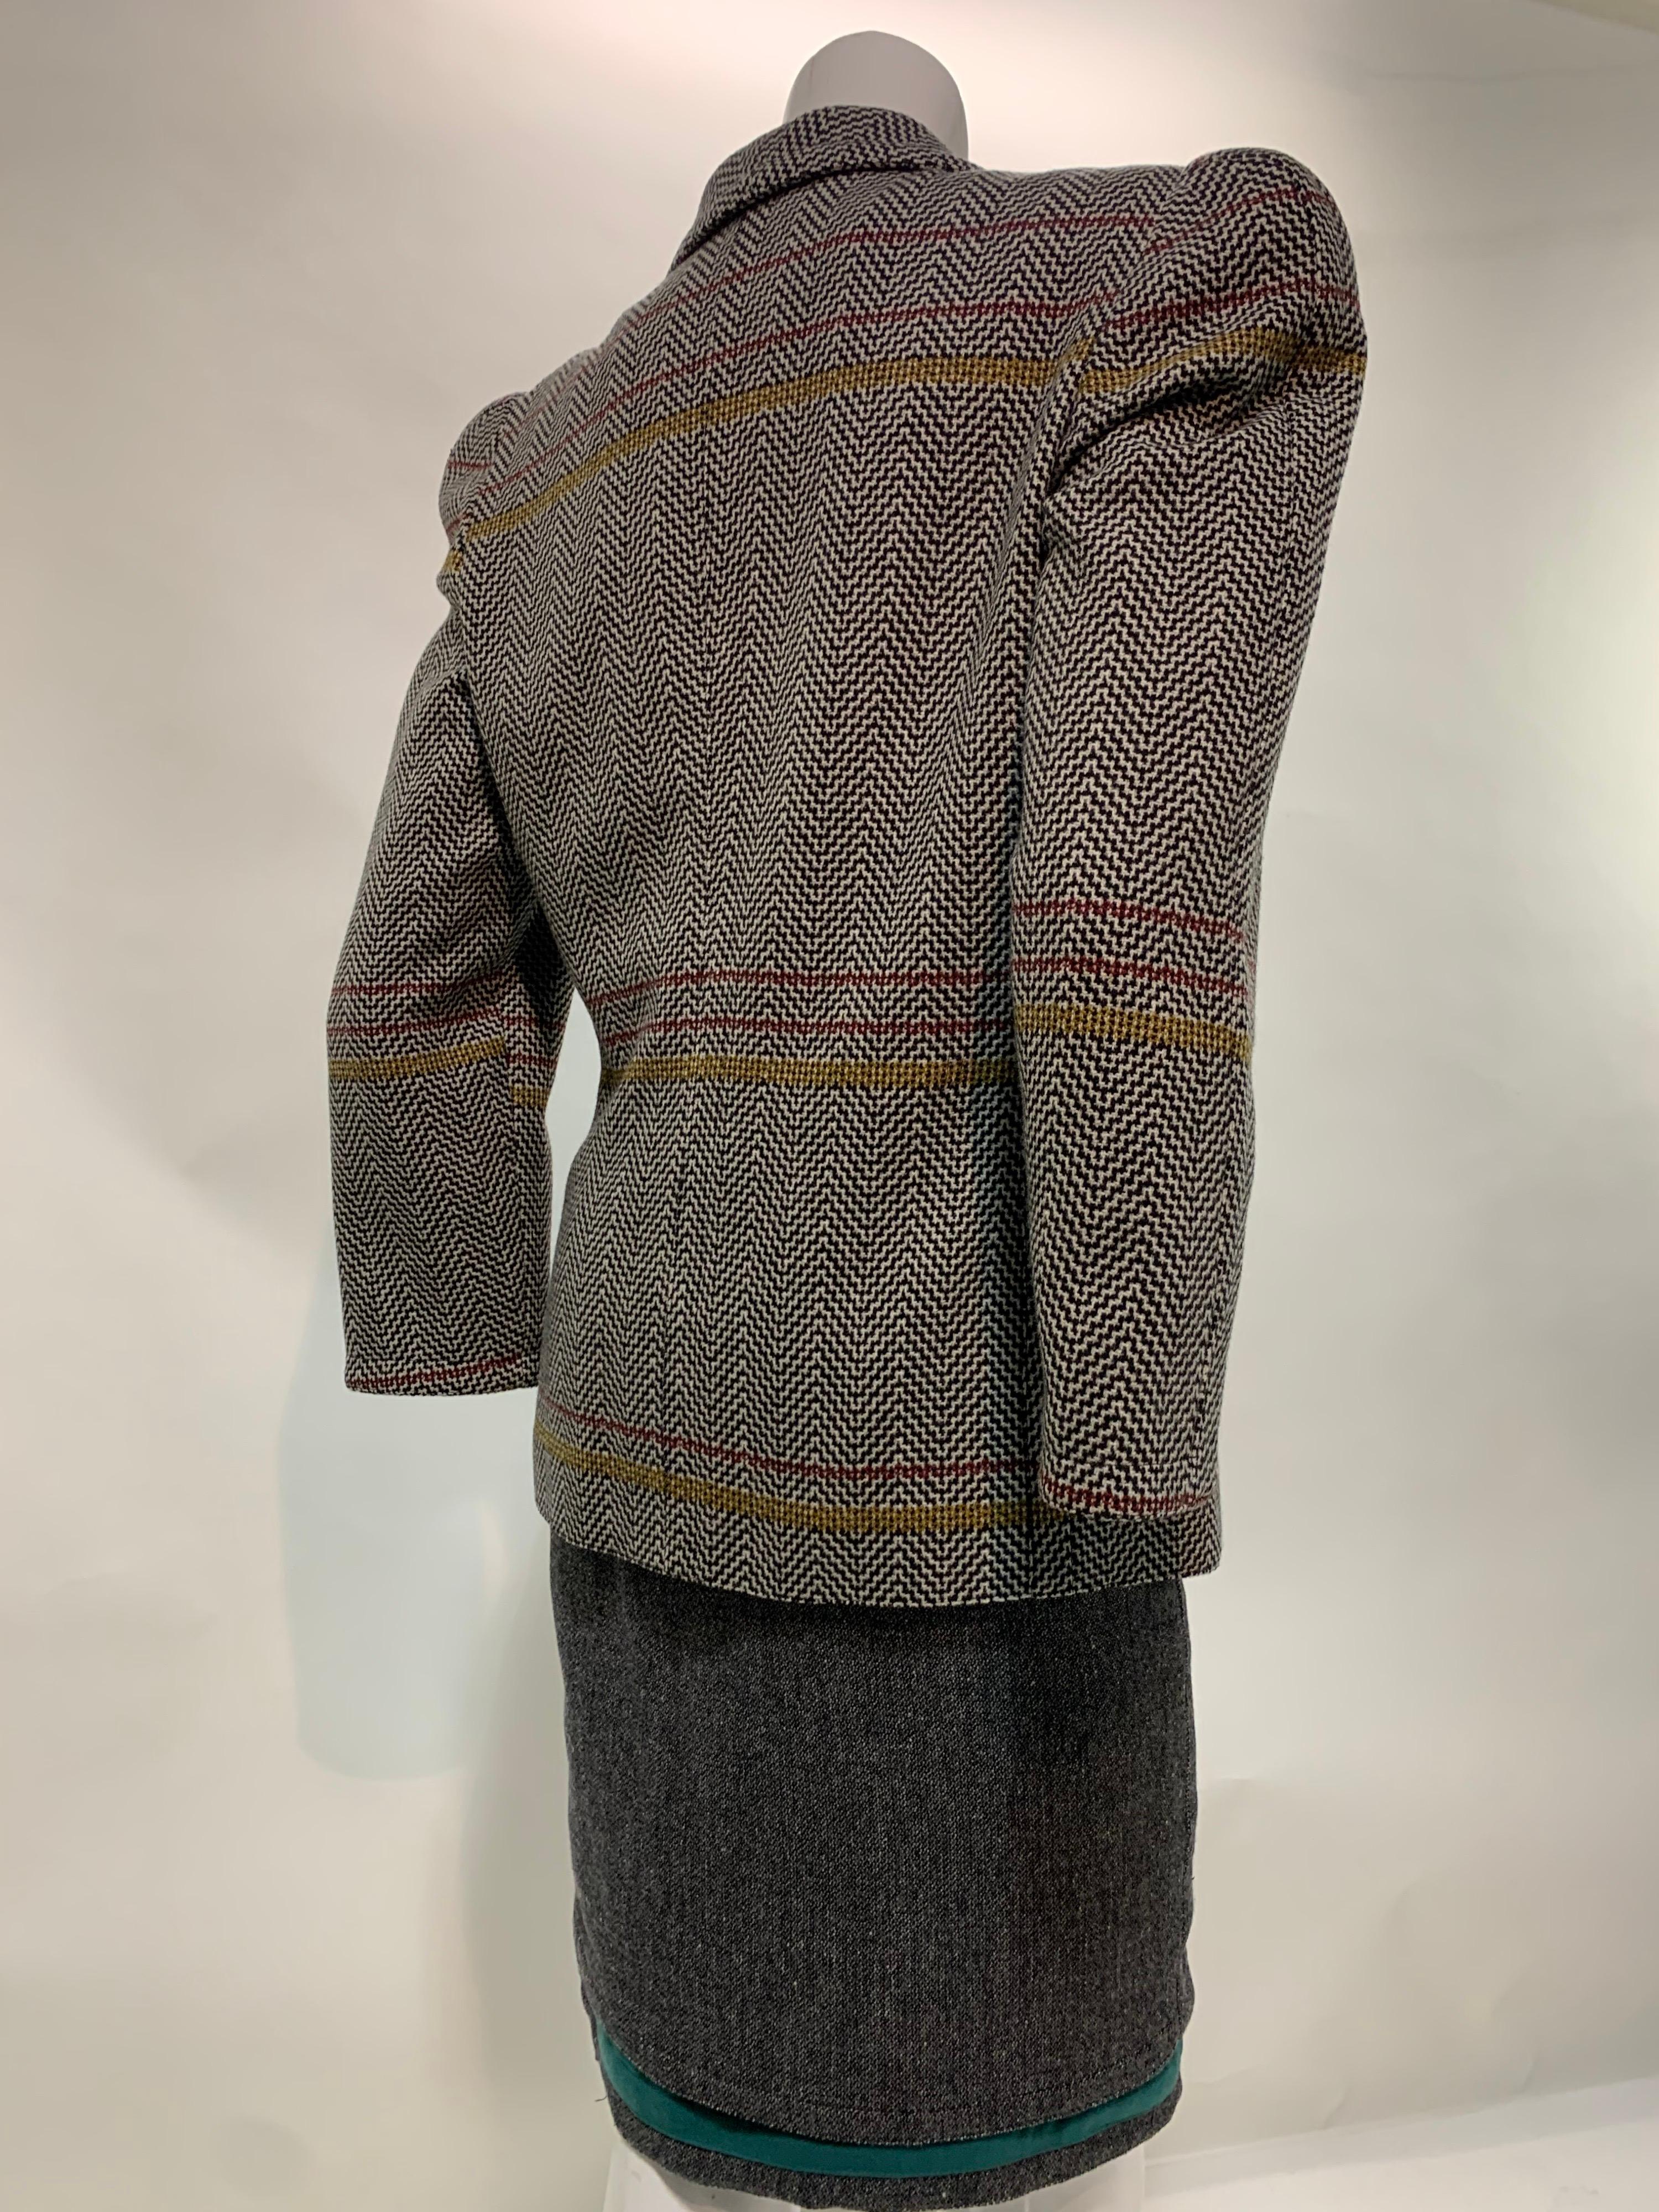 1980 Gianni Versace Mixed Tweed Skirt Suit w/ Structured Shoulder Silhouette For Sale 3